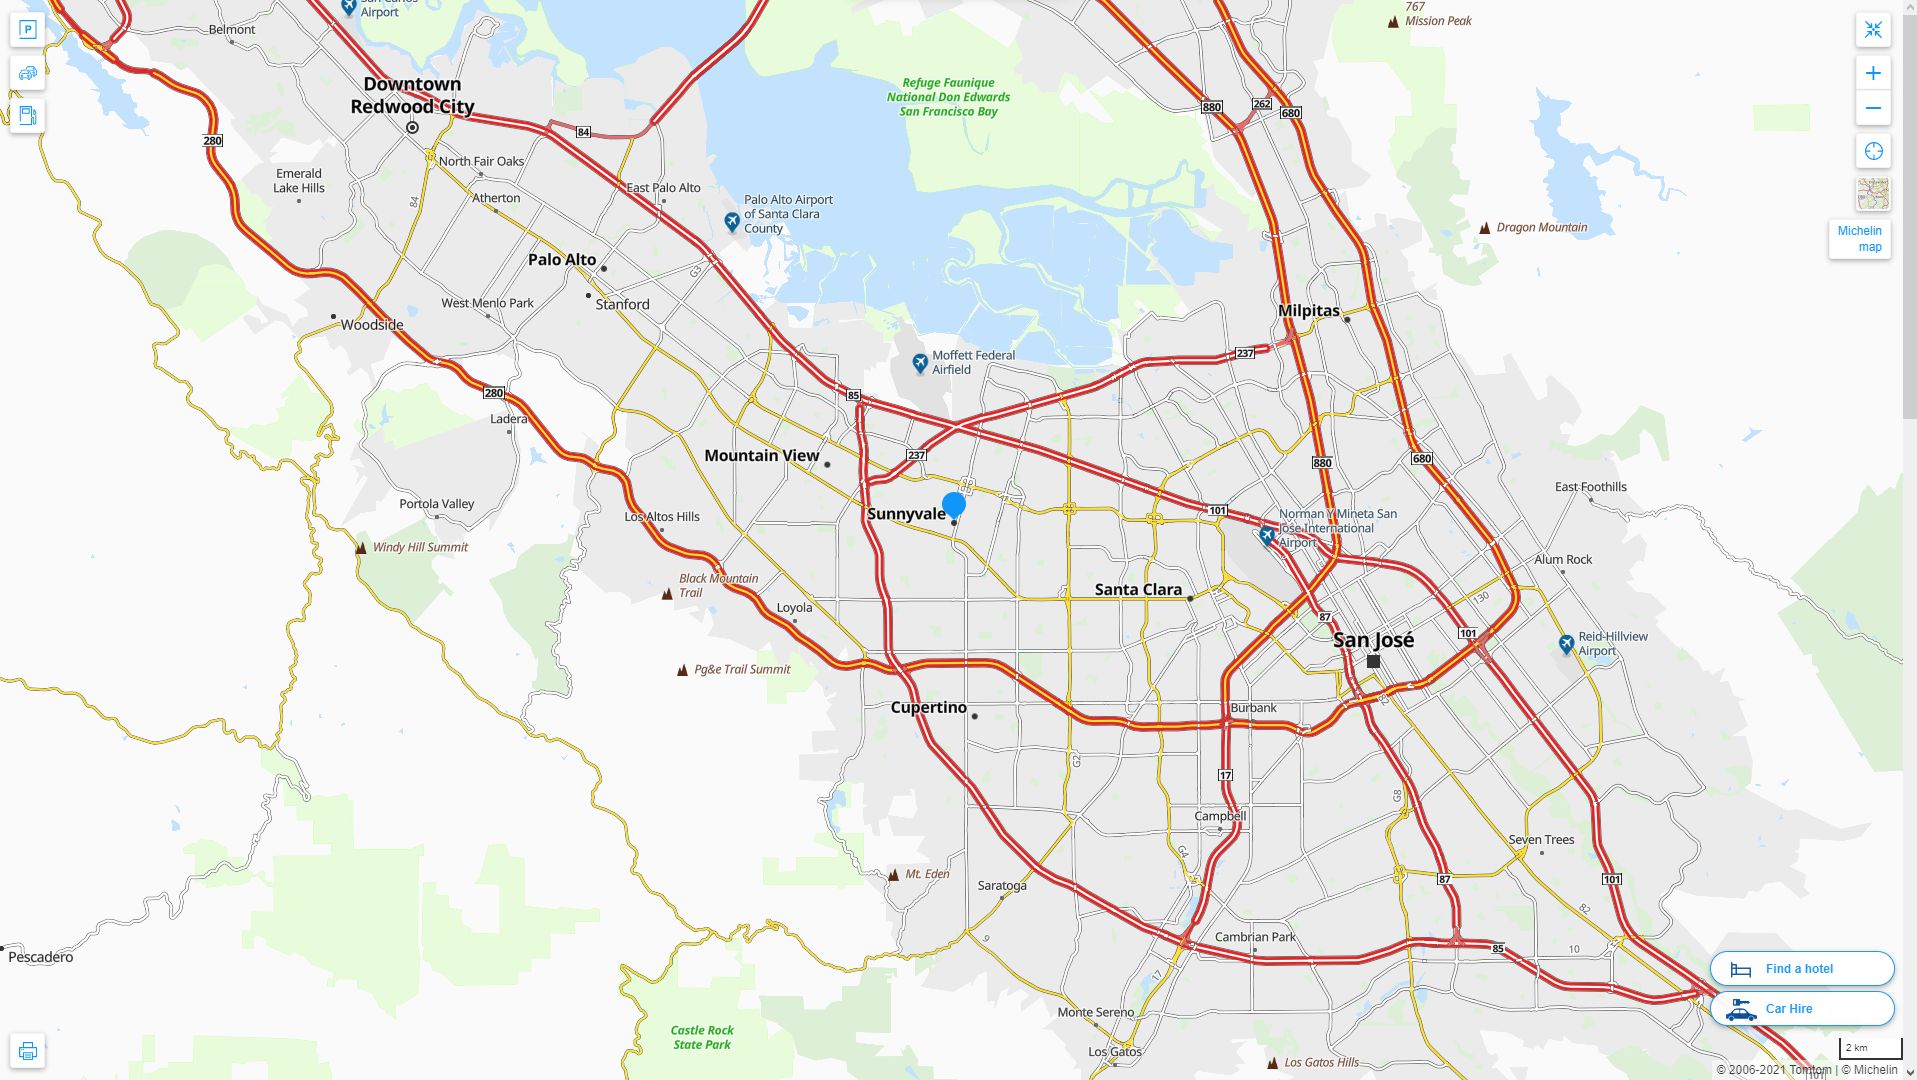 Sunnyvale California Highway and Road Map